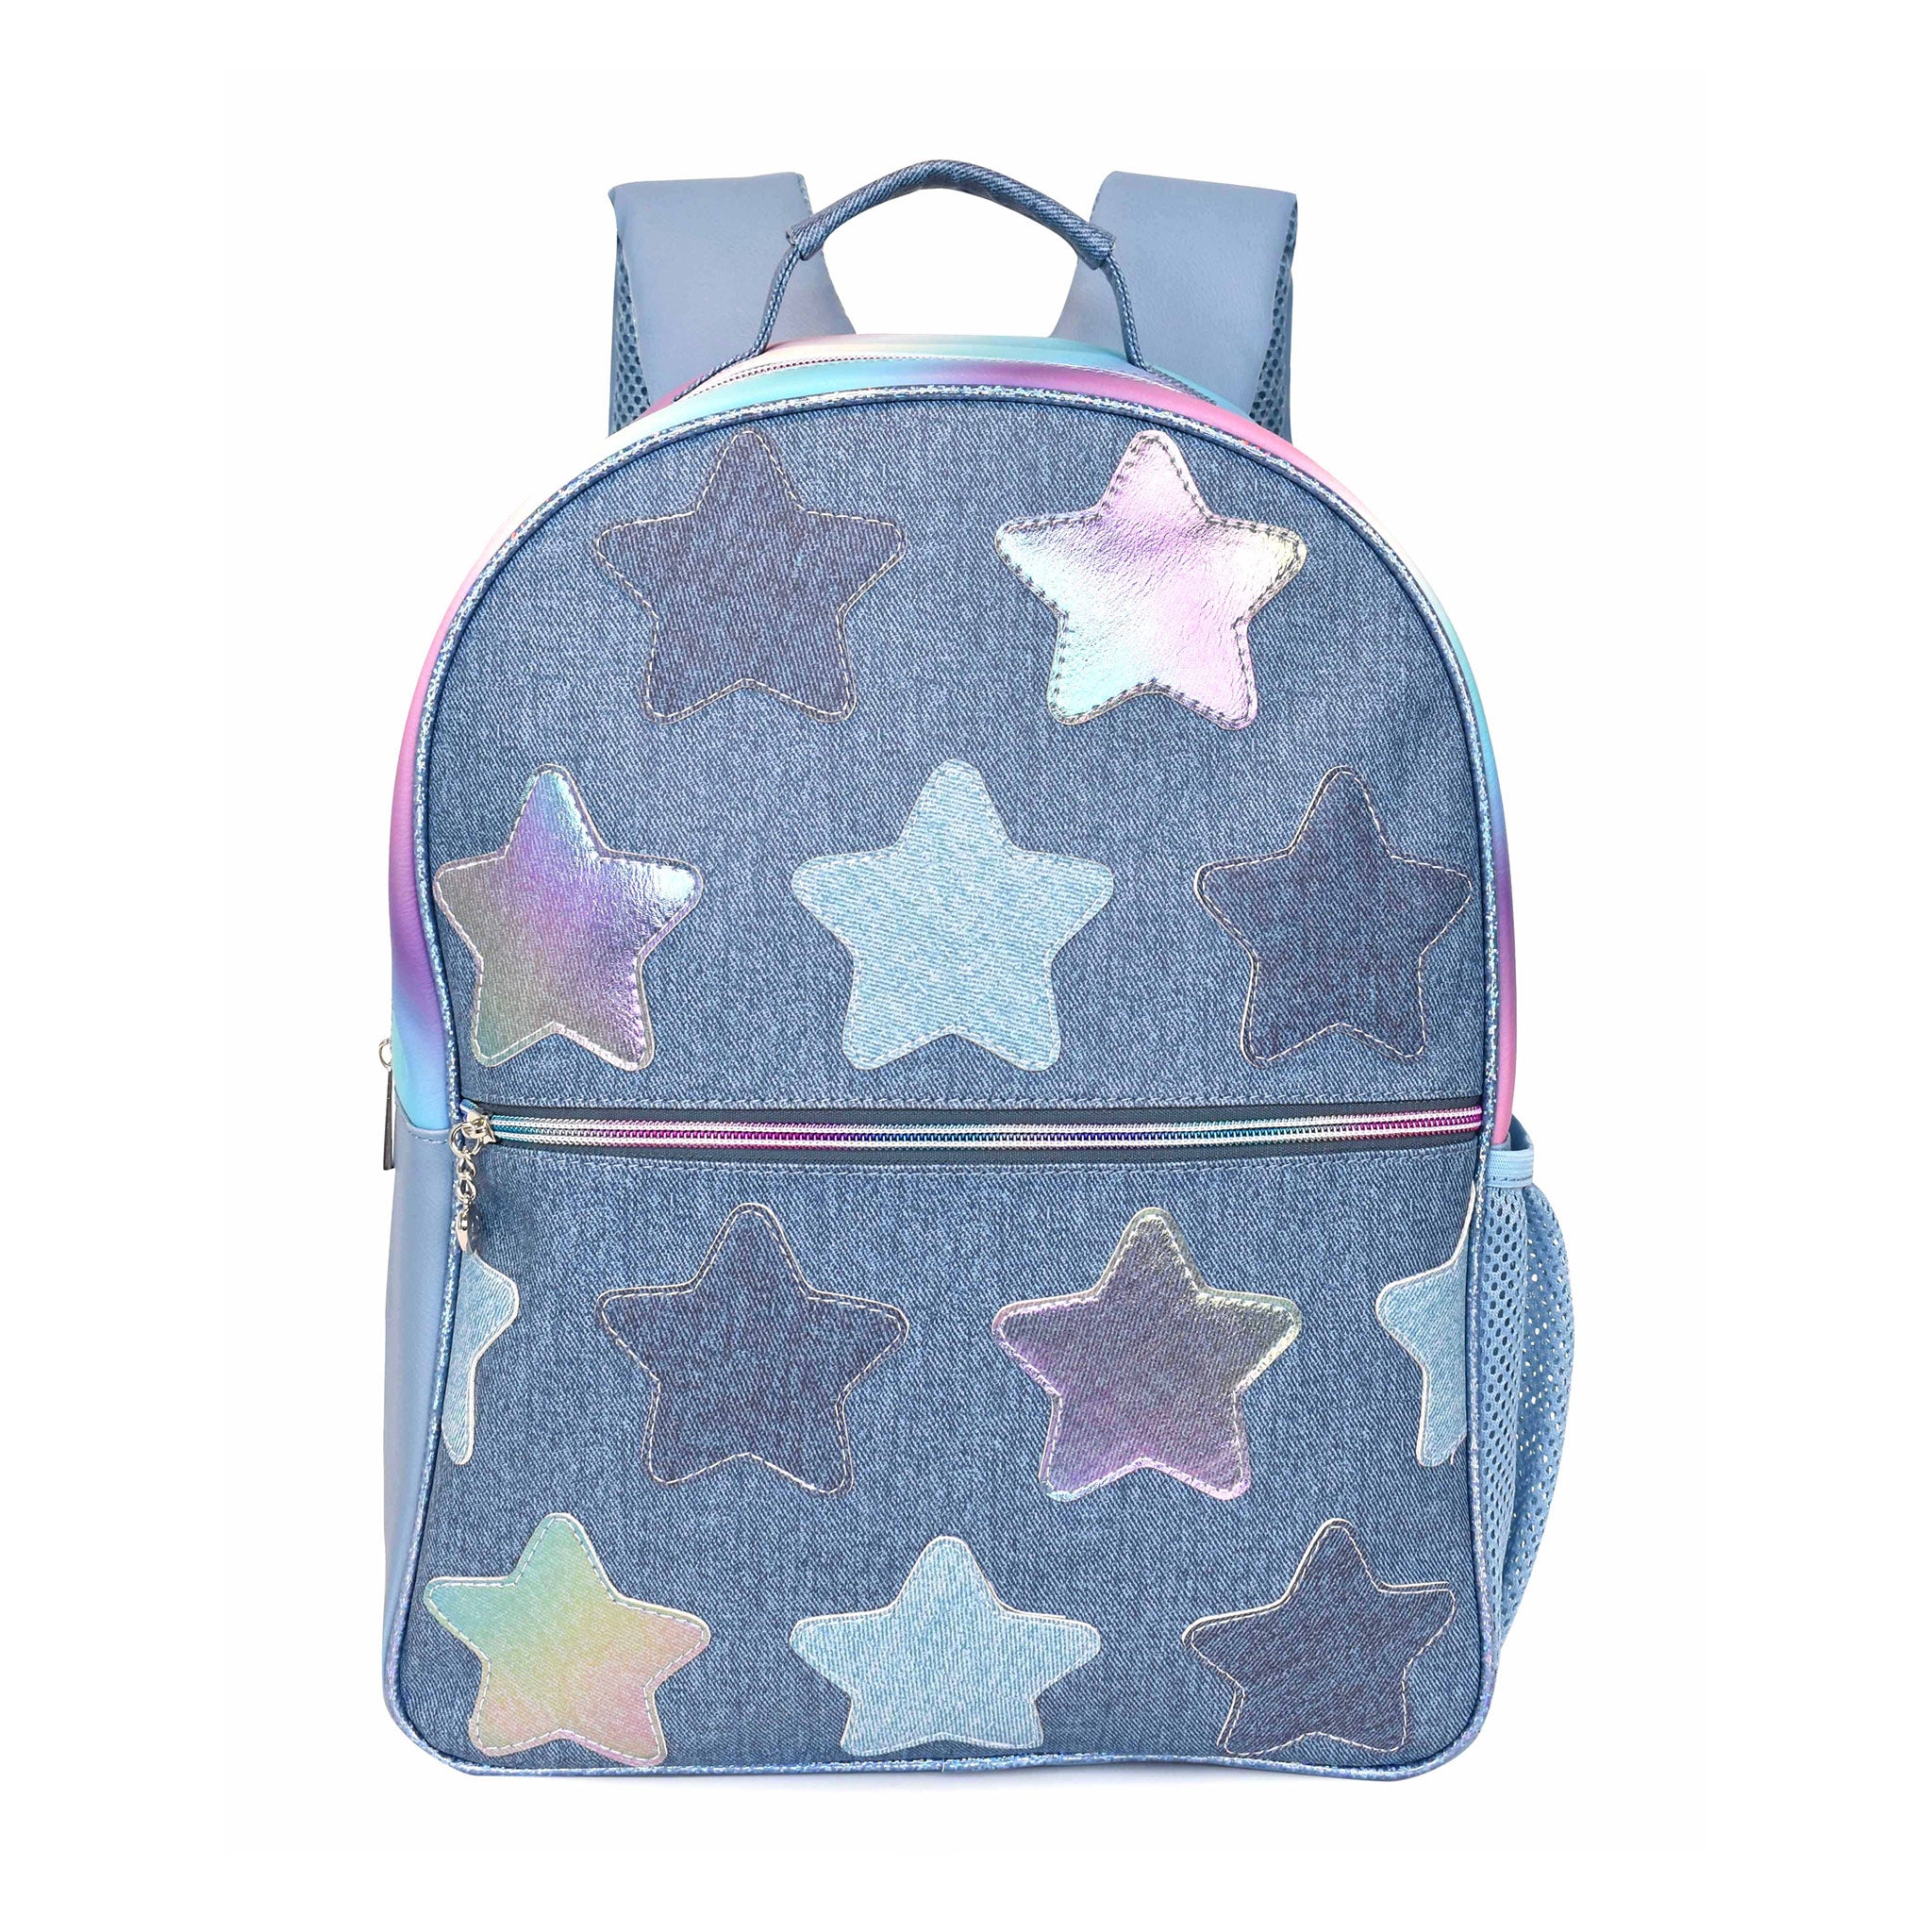 Front view of a denim large backpack with denim and metallic star patches